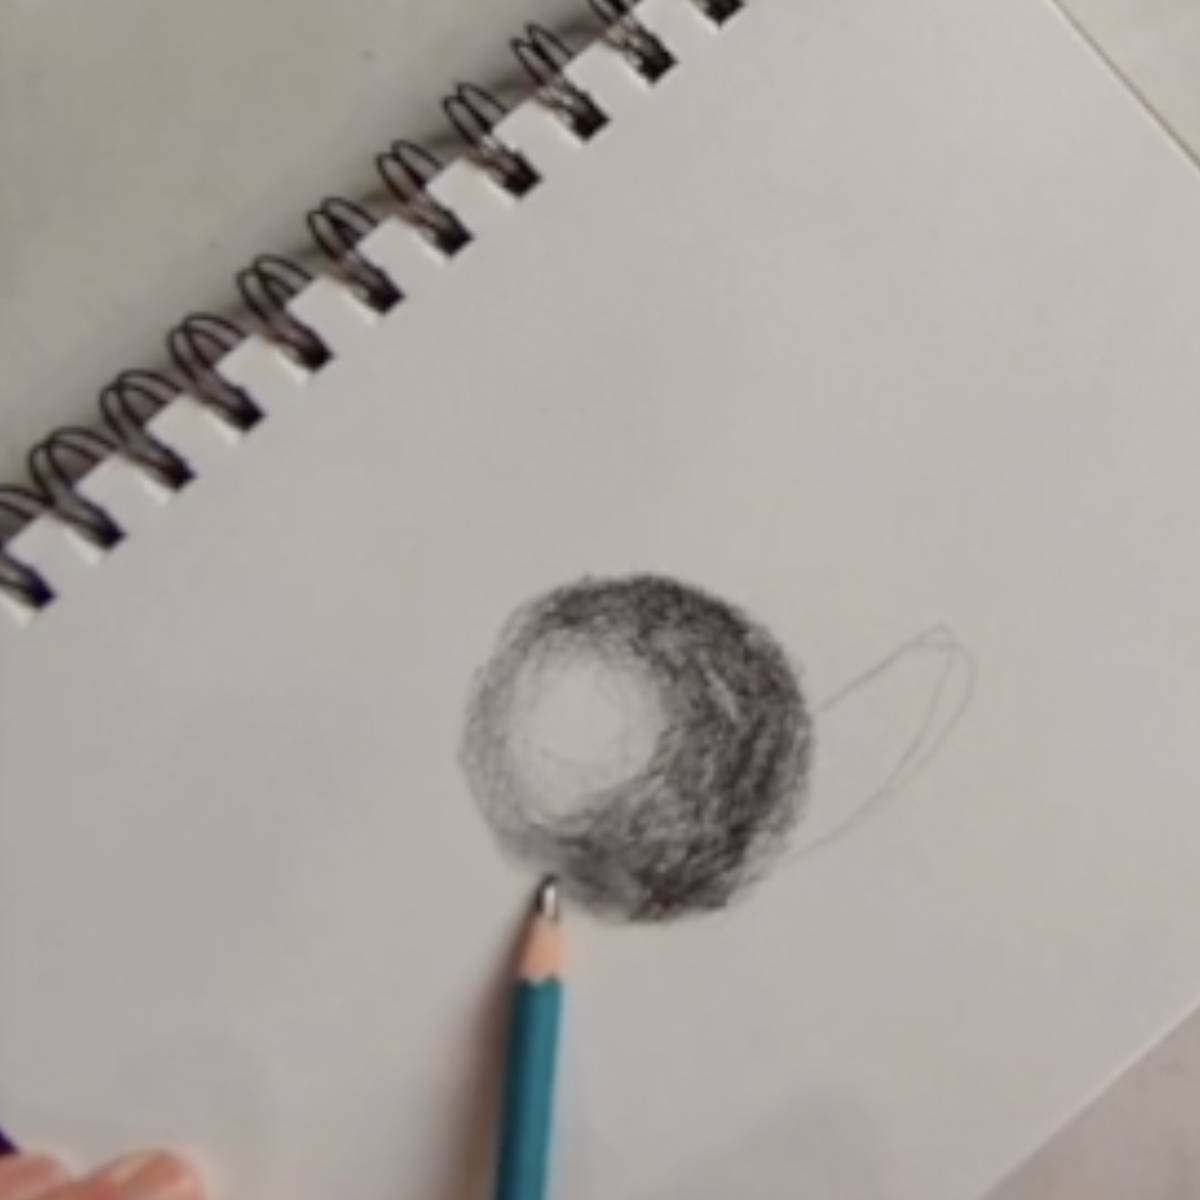 How to draw and shade a sphere